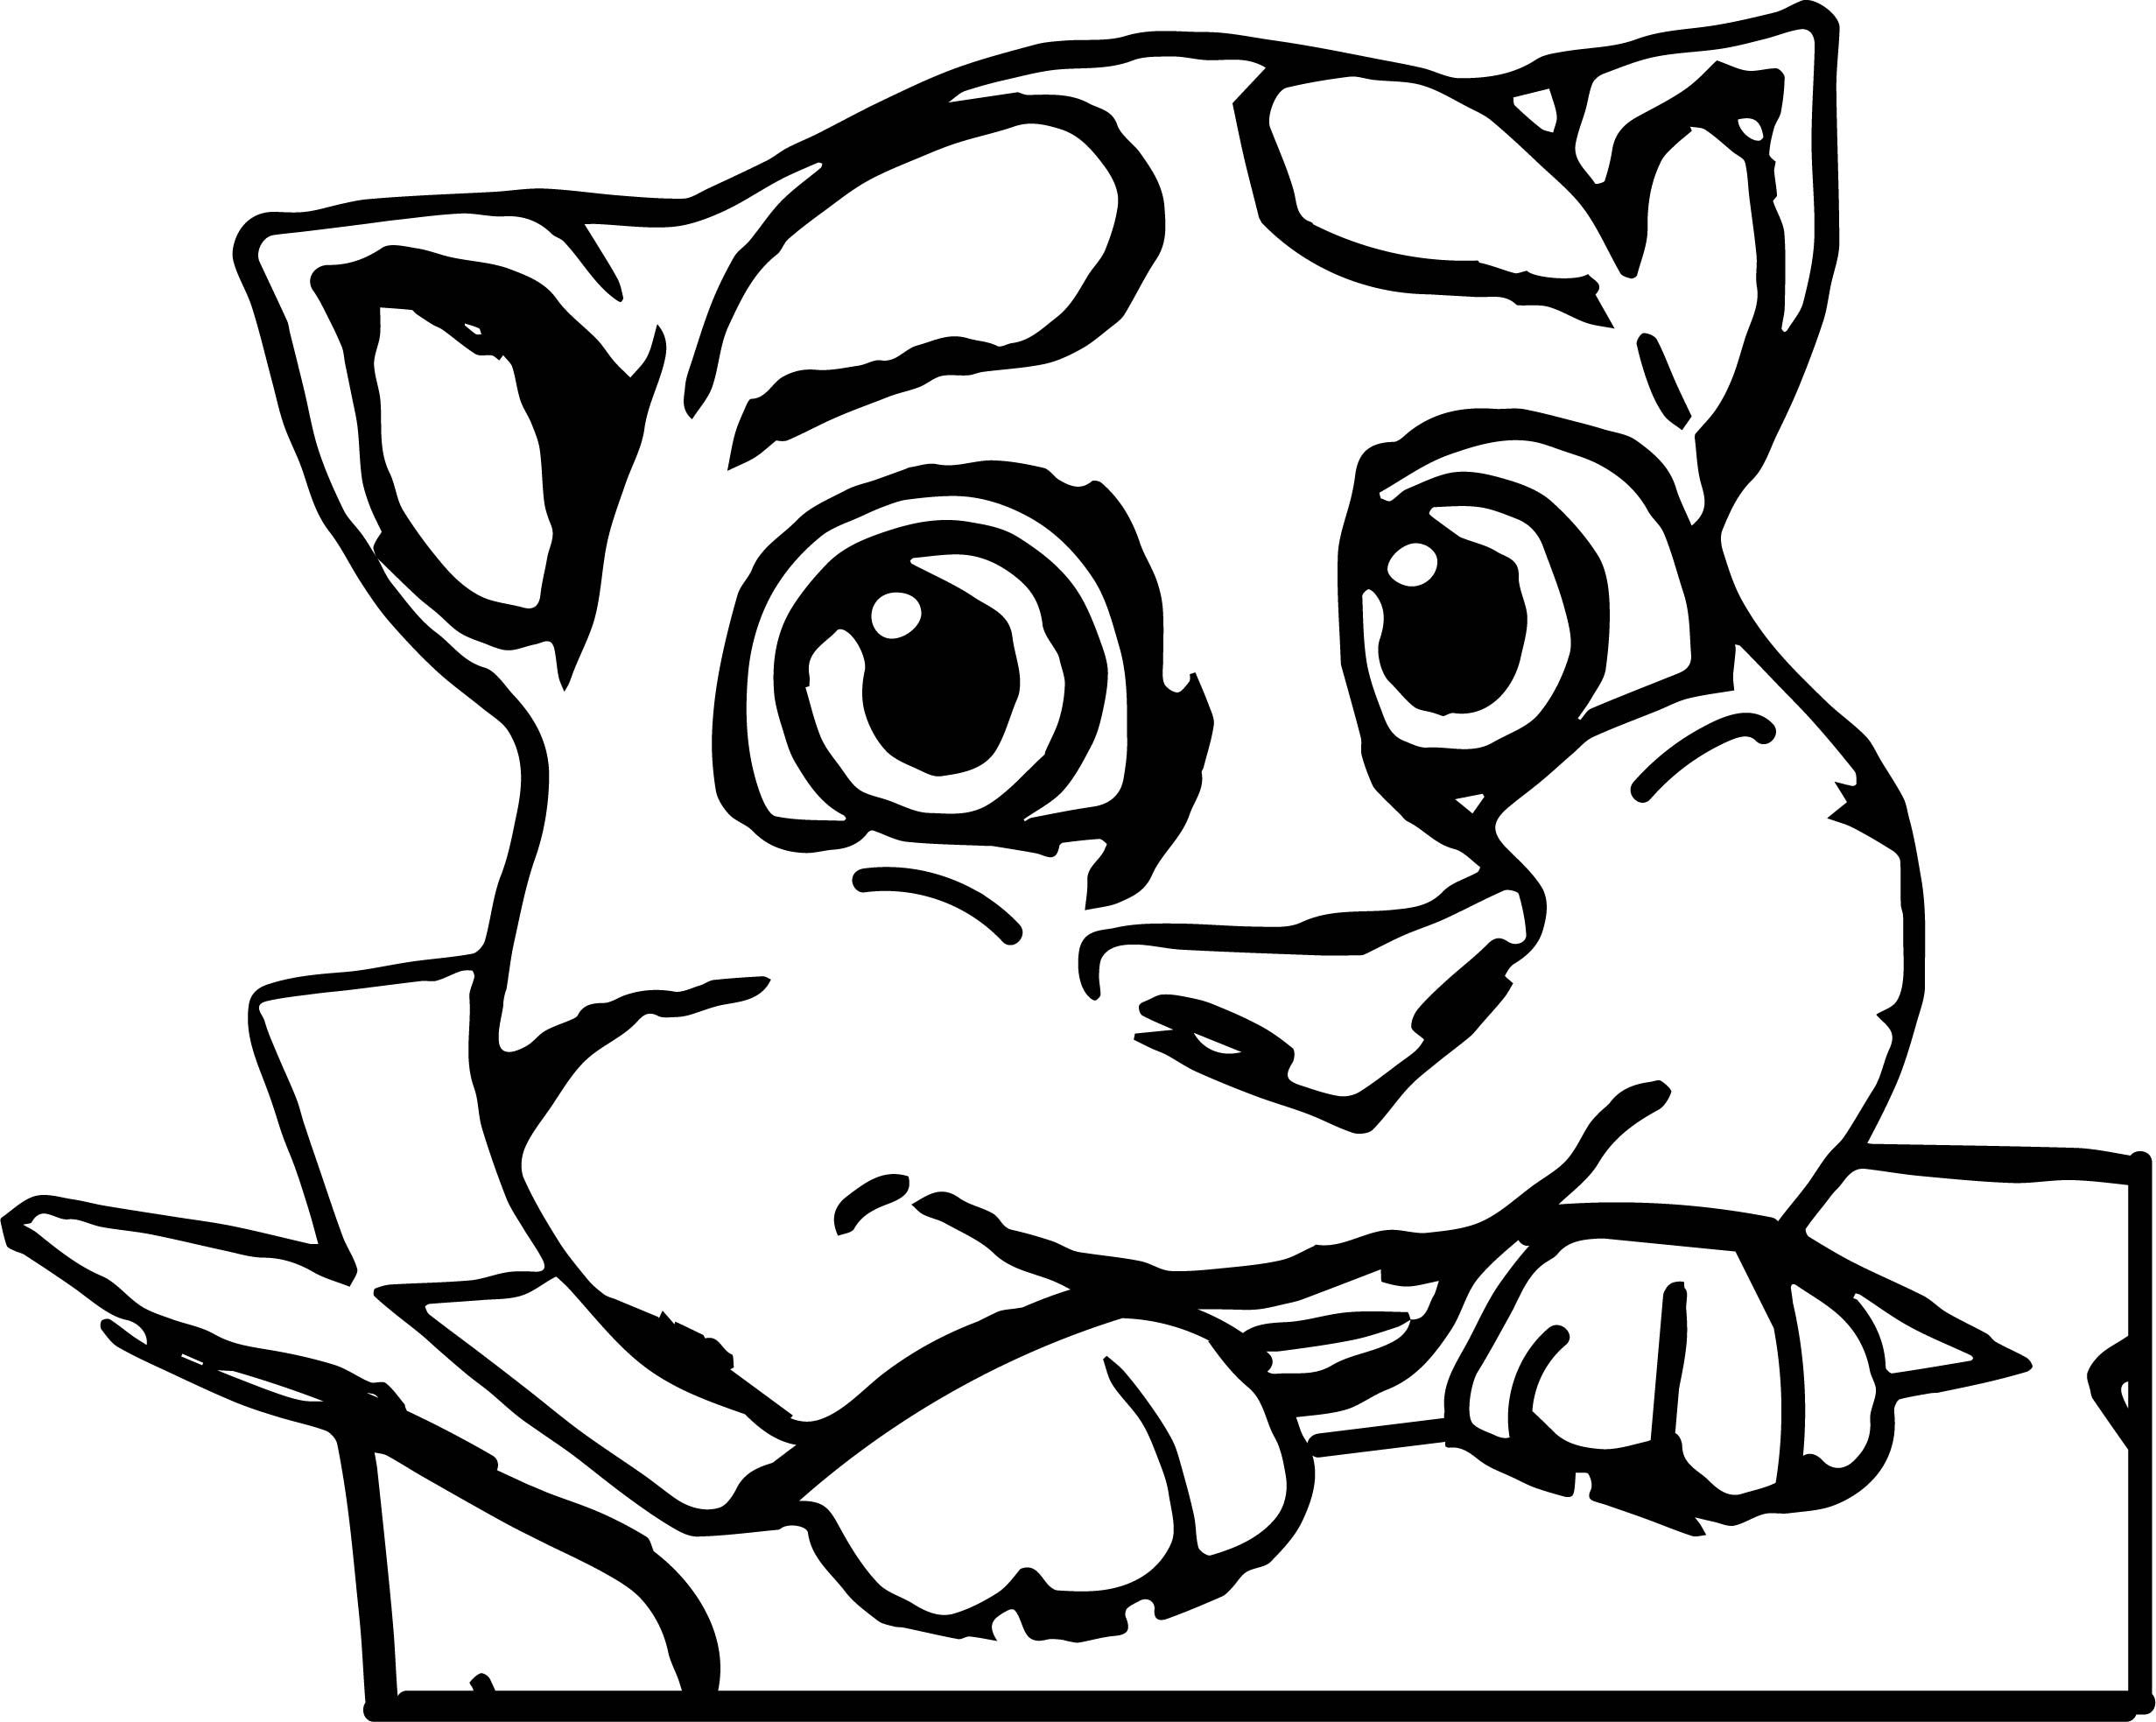 Talking Tom Coloring Pages.